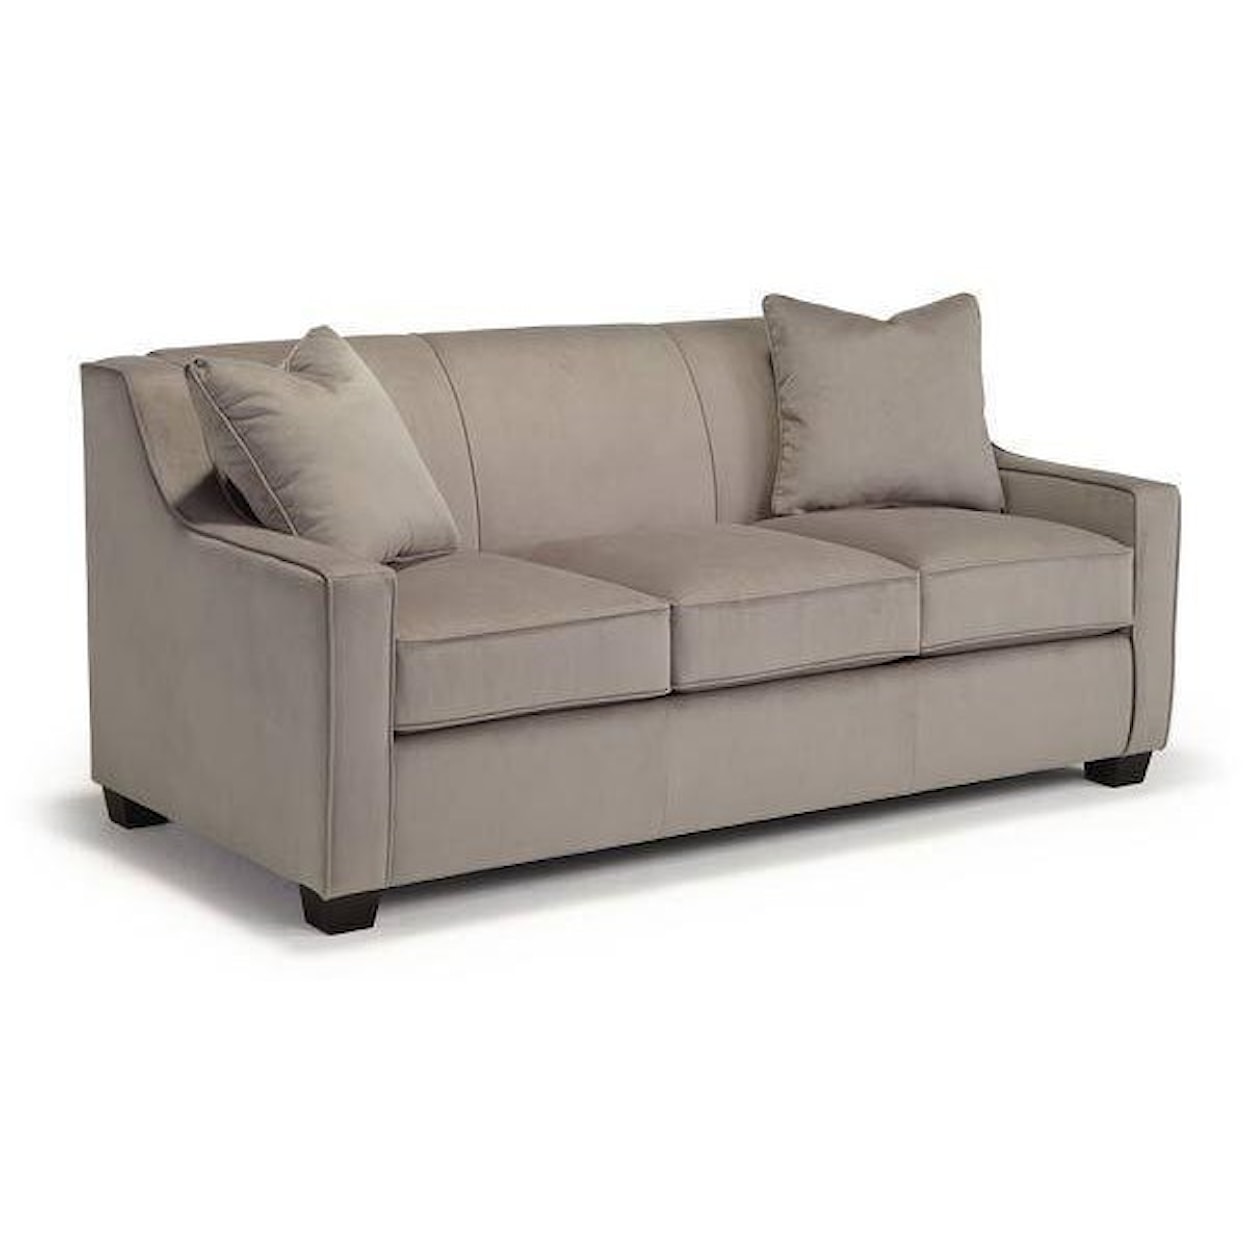 Best Home Furnishings Shannon QUEEN STATIONARY SOFA SLEEPER